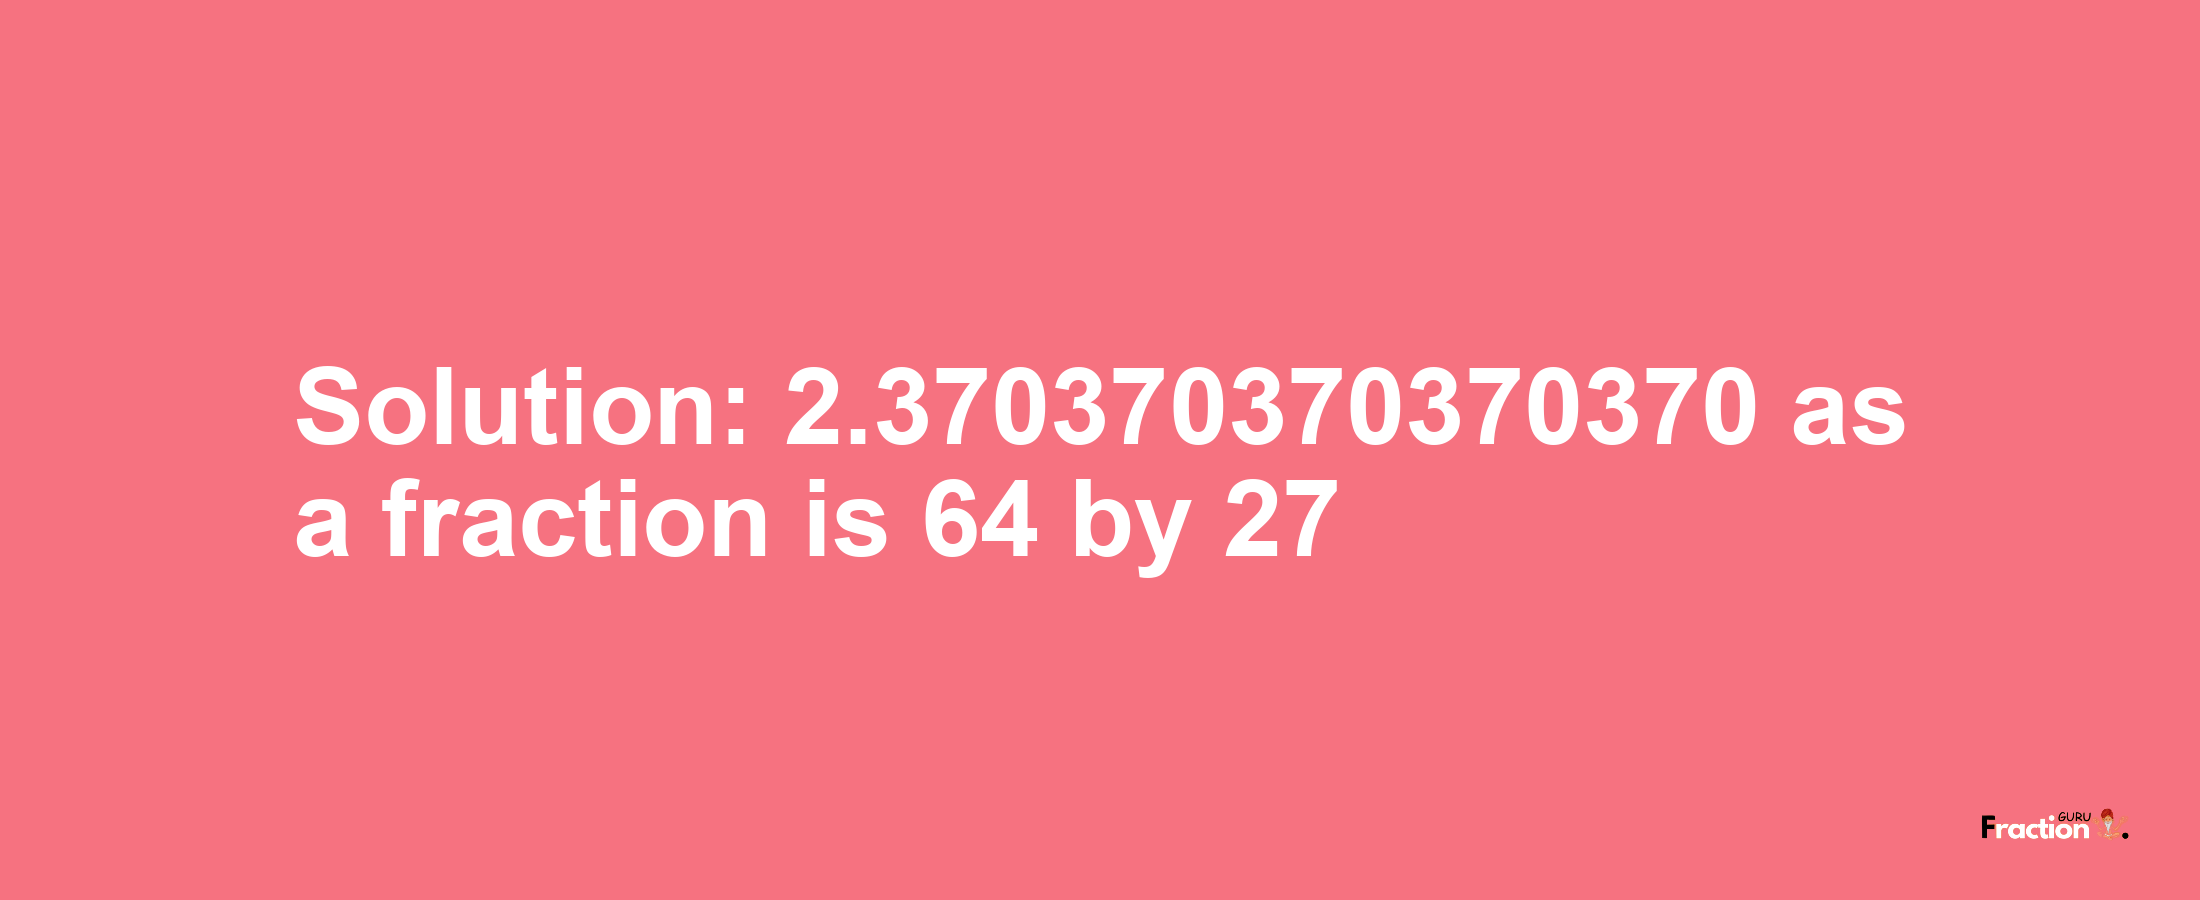 Solution:2.370370370370370 as a fraction is 64/27